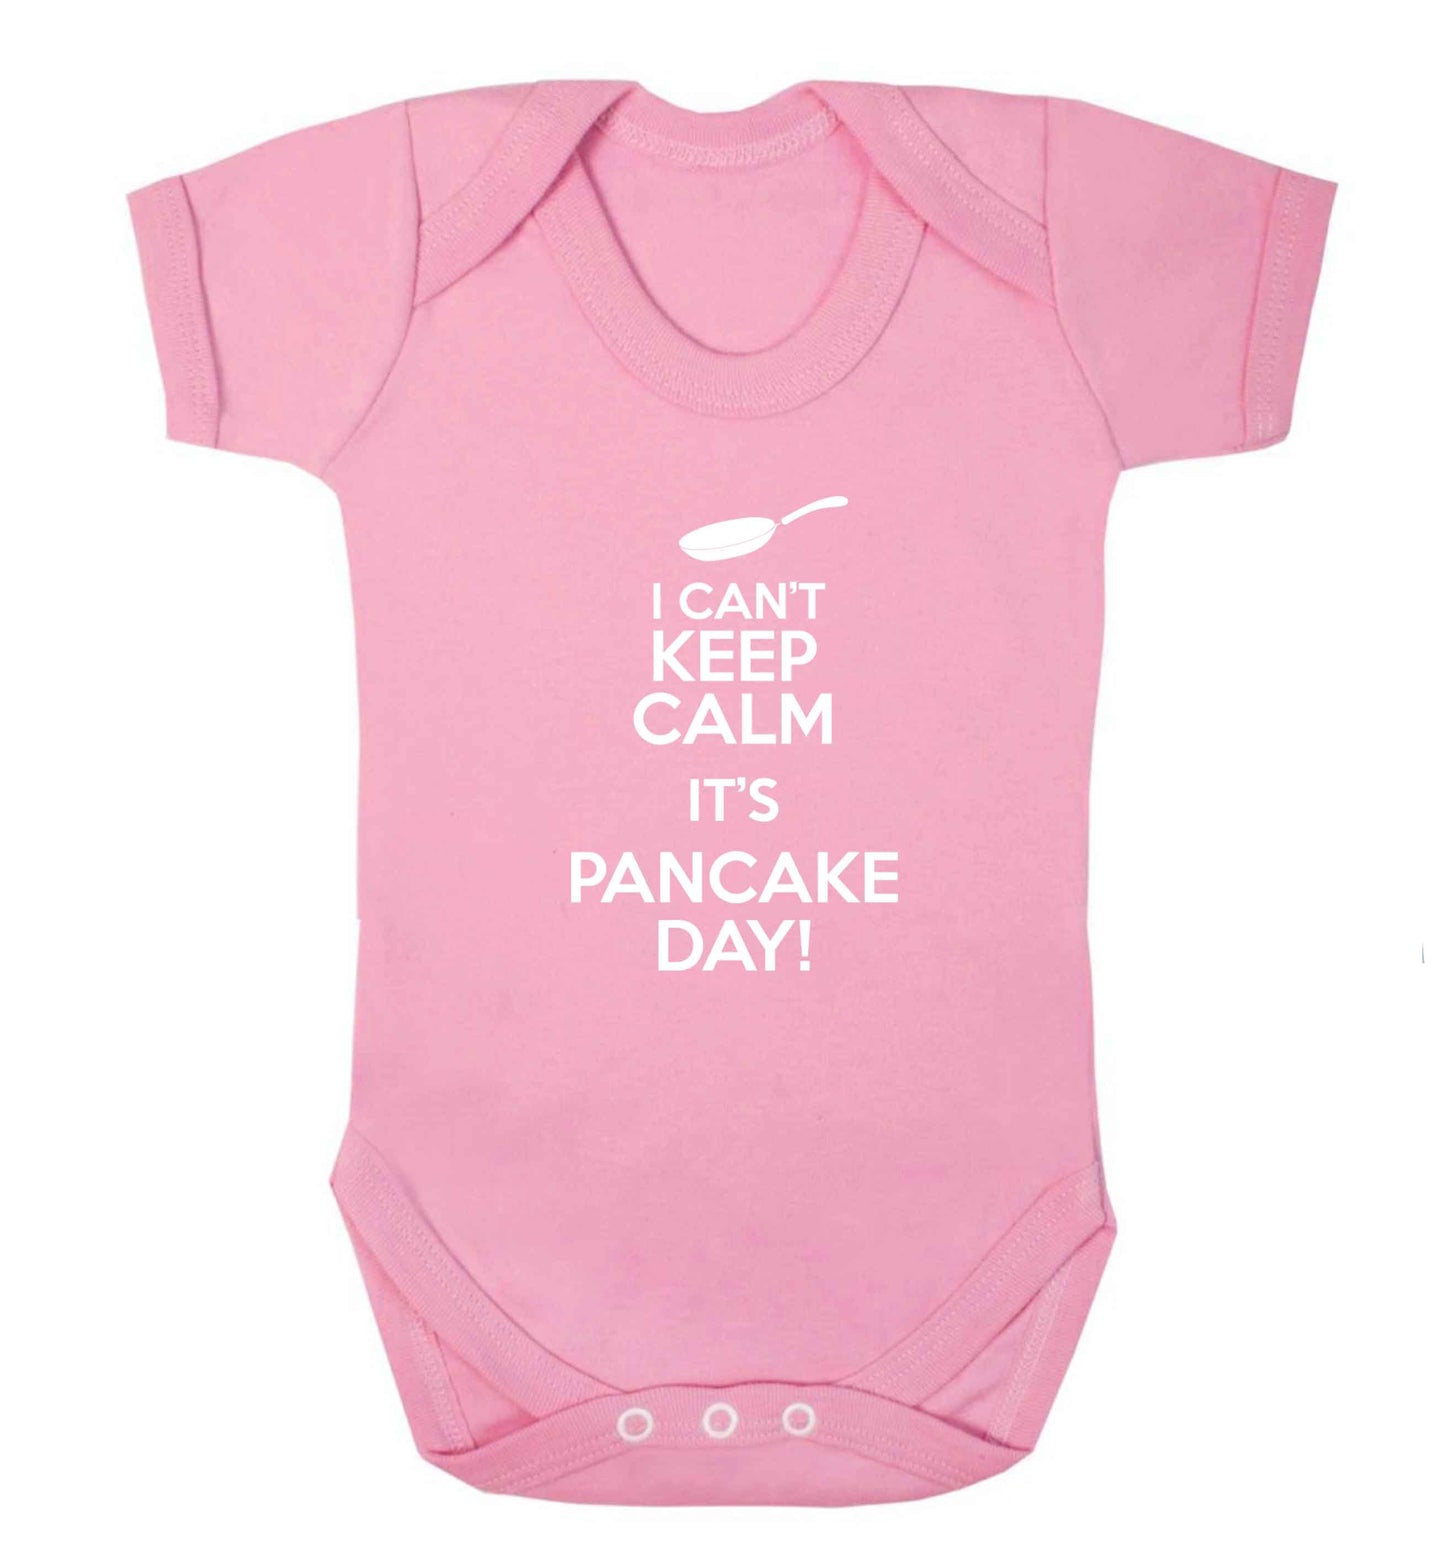 I can't keep calm it's pancake day! baby vest pale pink 18-24 months